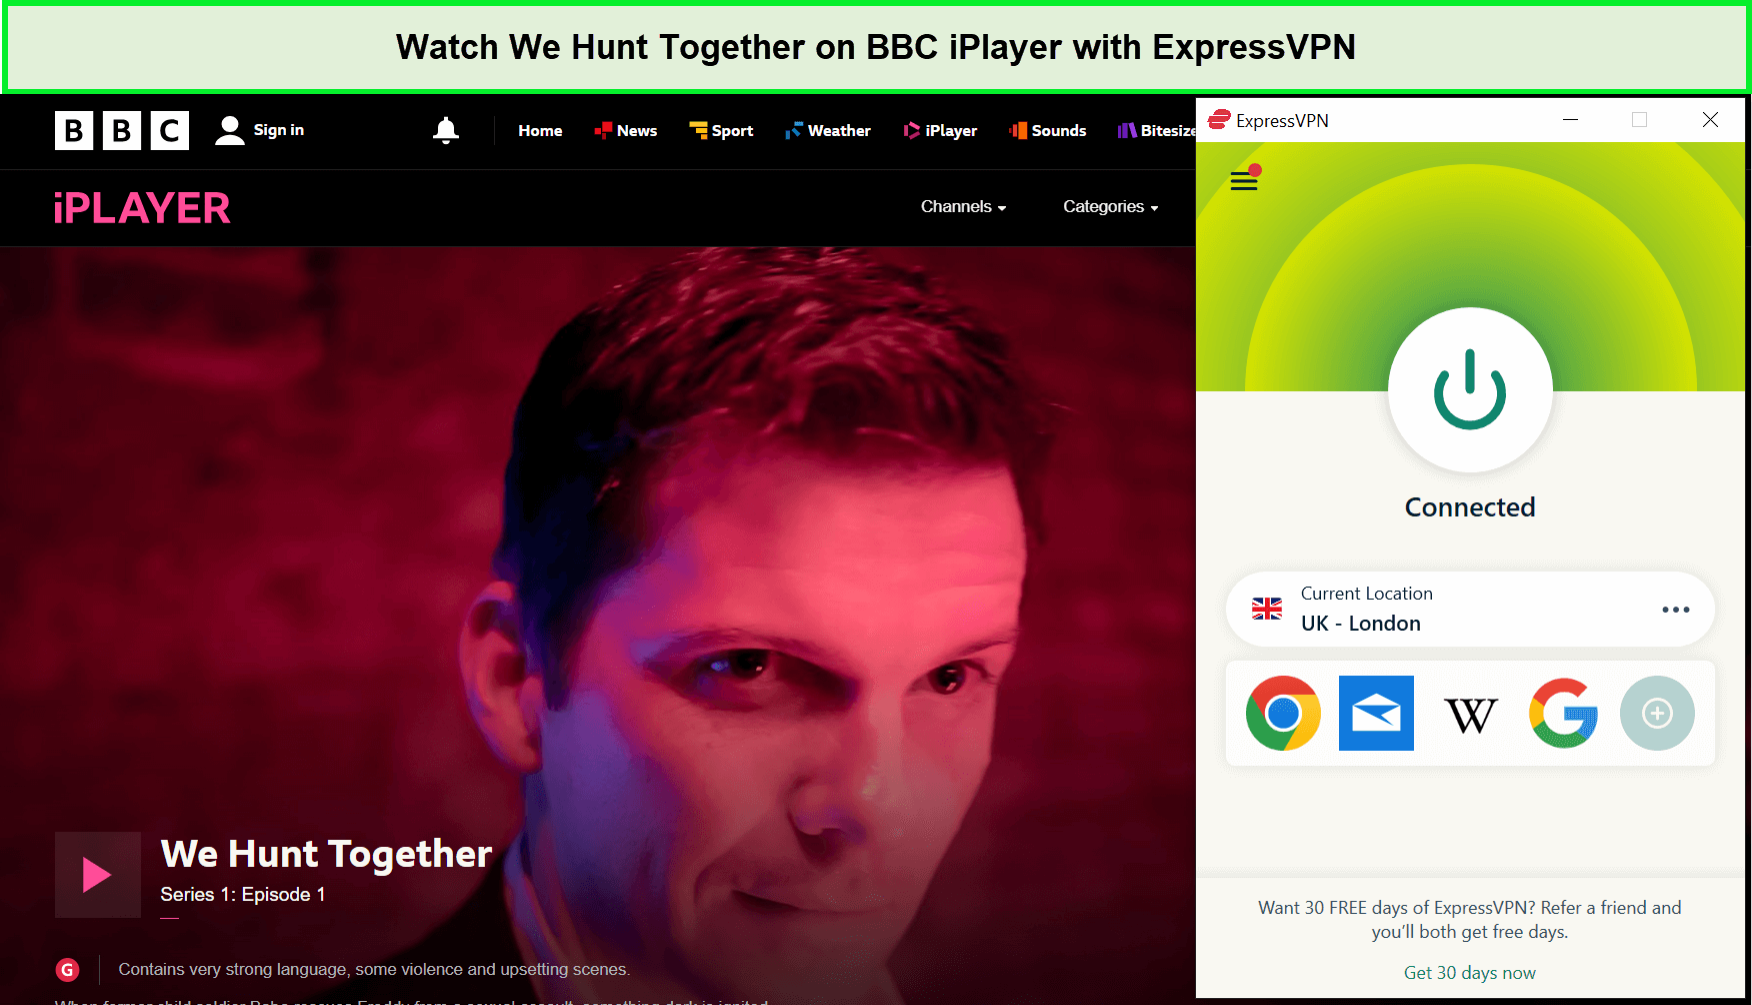 Watch-We-Hunt-Together-in-USAon-BBC-iPlayer-with-ExpressVPN